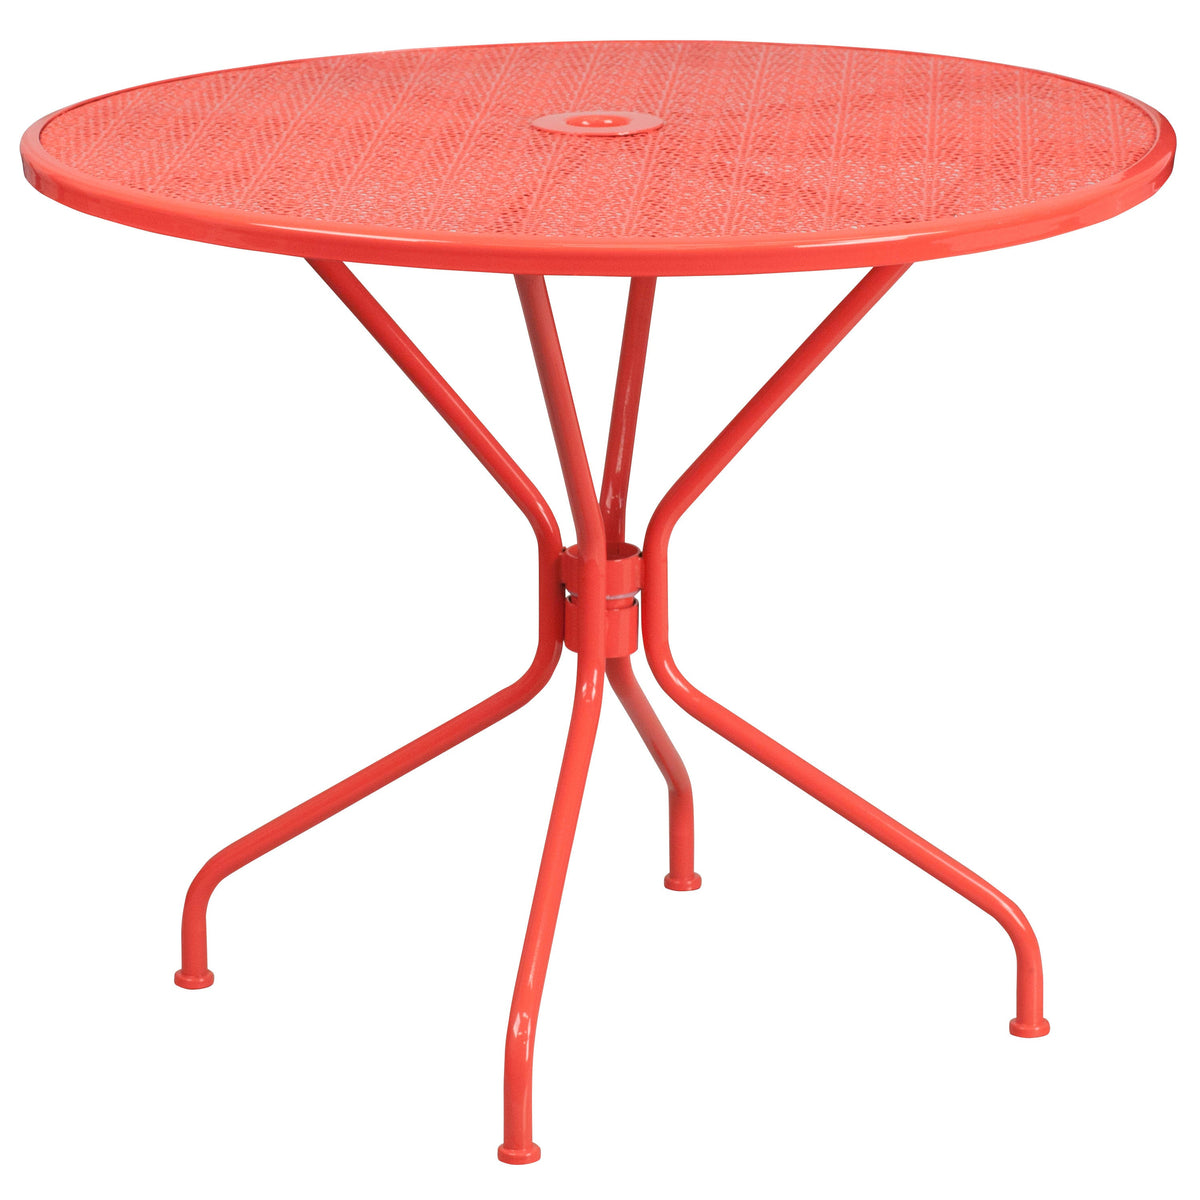 Coral |#| 35.25inch Round Coral Indoor-Outdoor Steel Patio Table Set w/ 2 Square Back Chairs